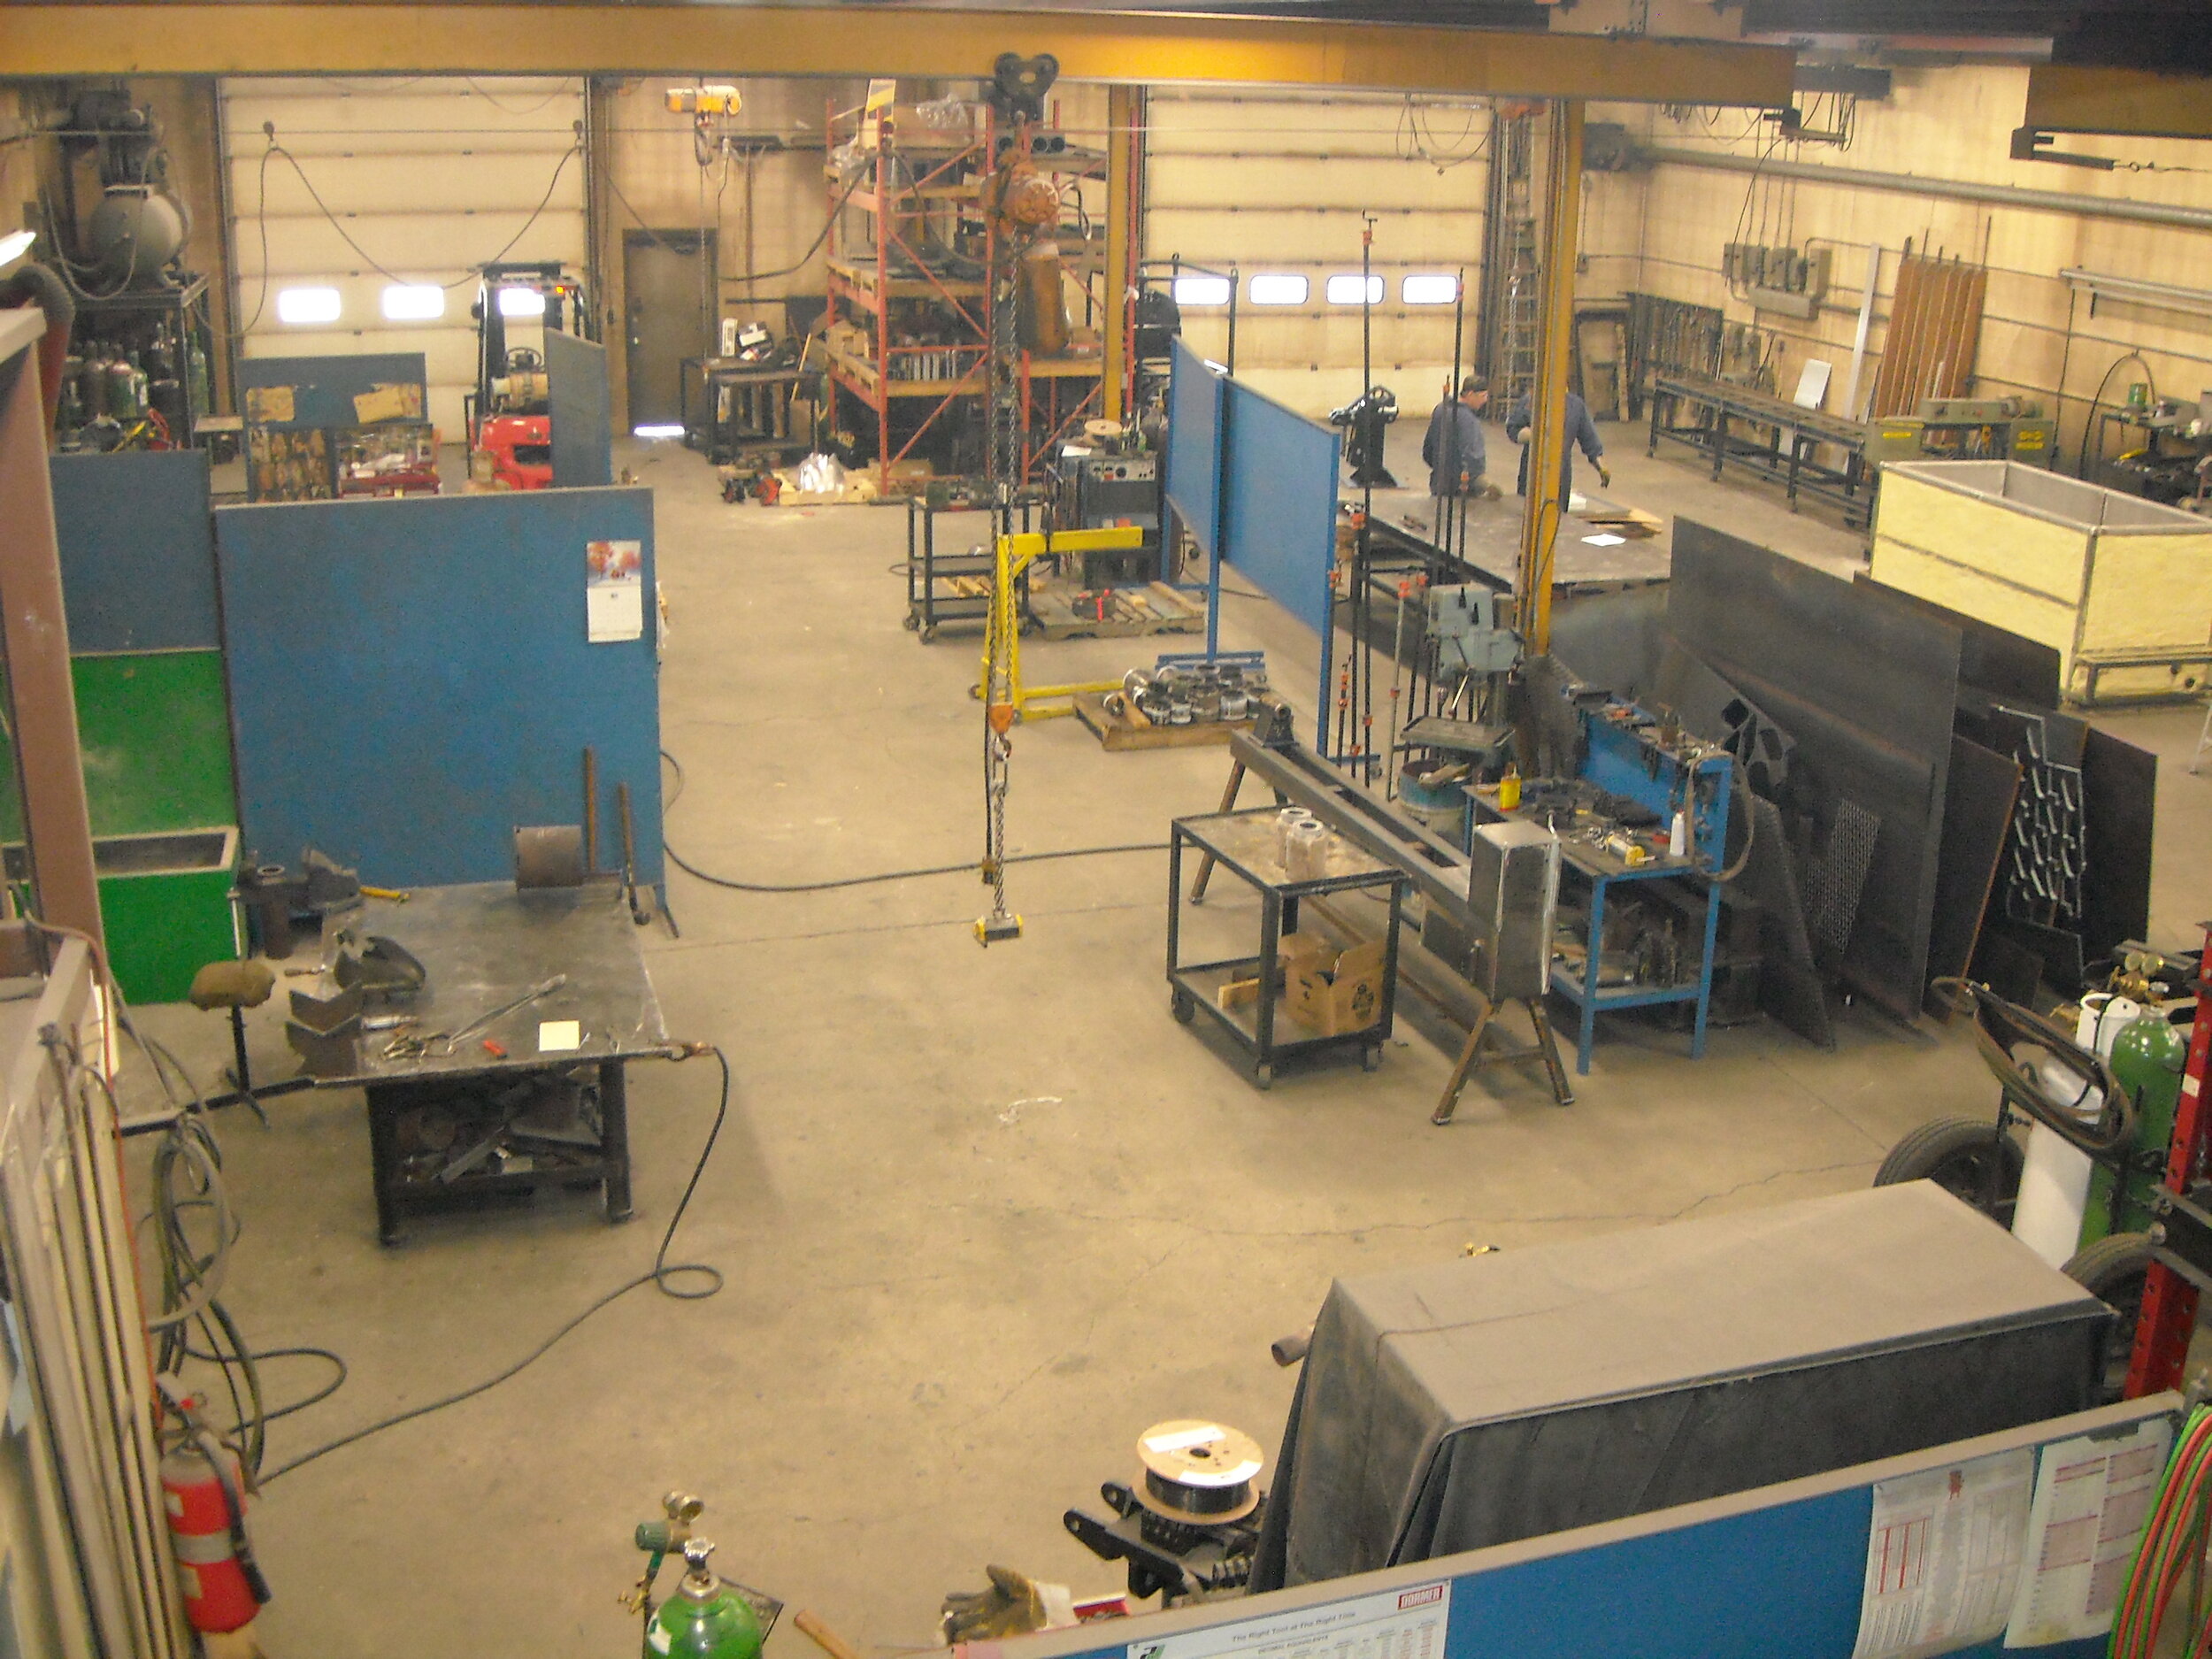   Specialized Custom Fabrication For The Oil &amp; Gas Industry Since 1990   Learn More  